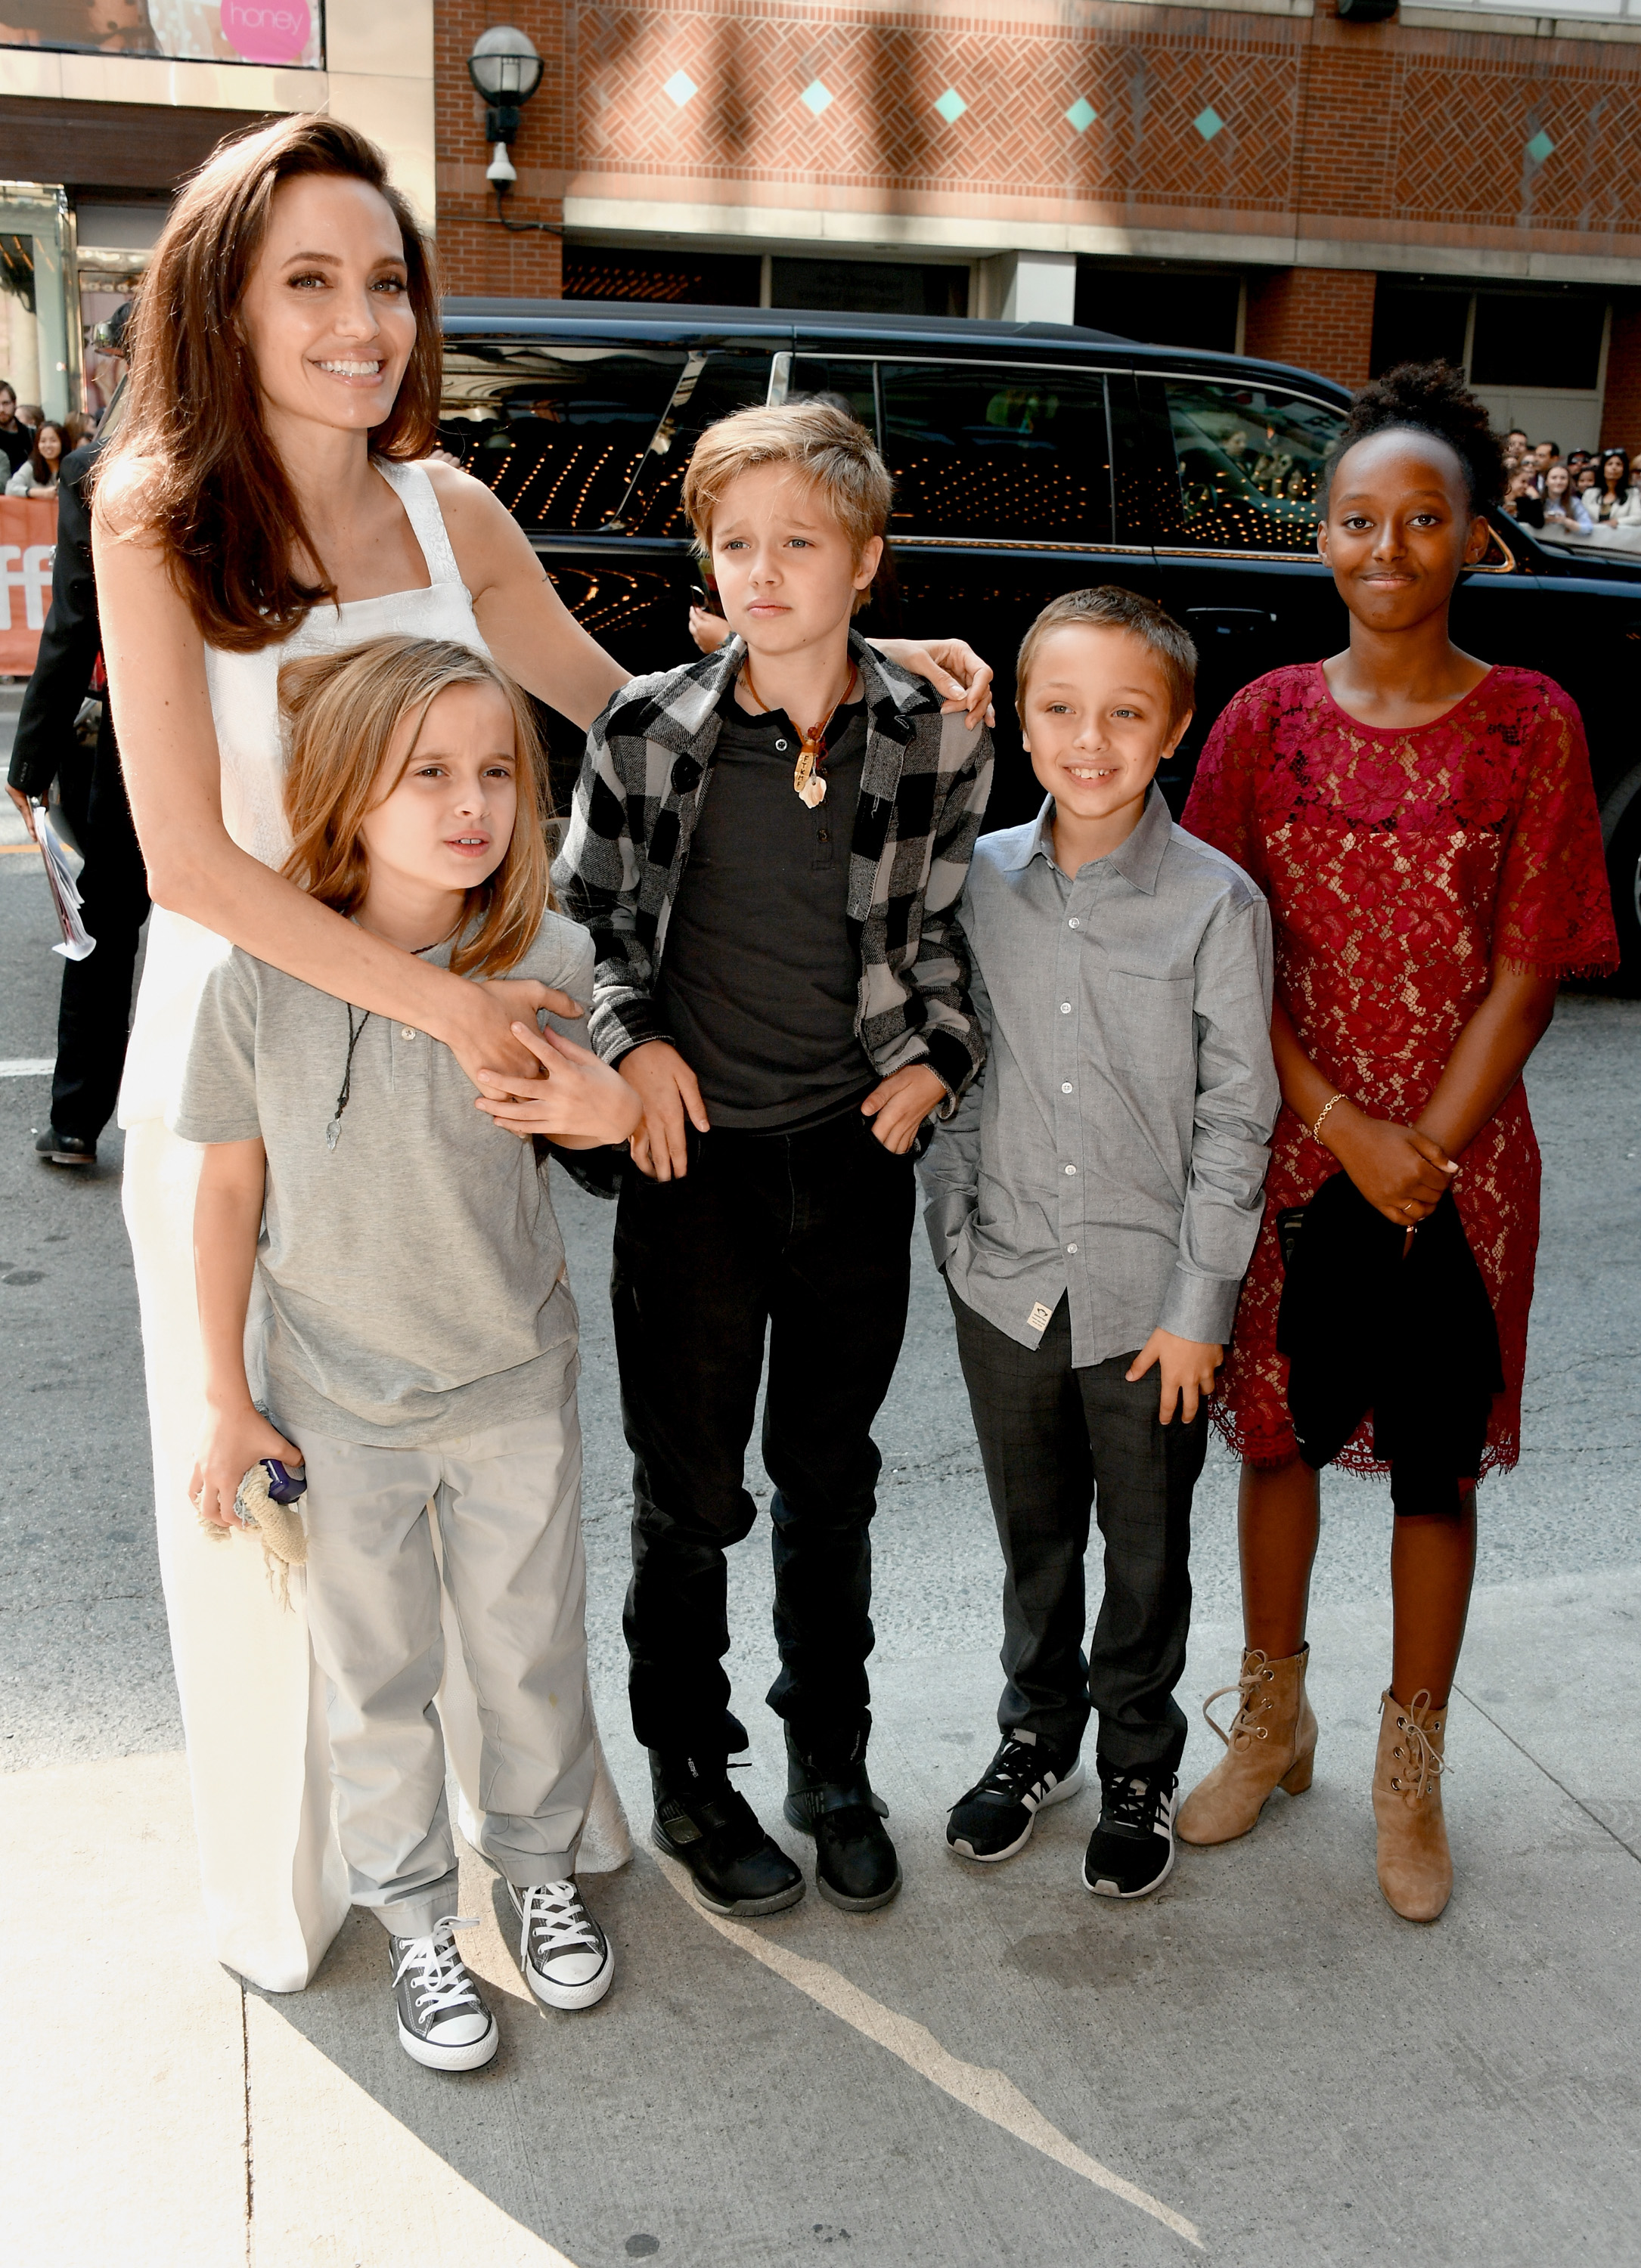 Angelina Jolie with her children Vivienne, Shiloh,  Knox, and Zahara in Canada in 2017. | Source: Getty Images